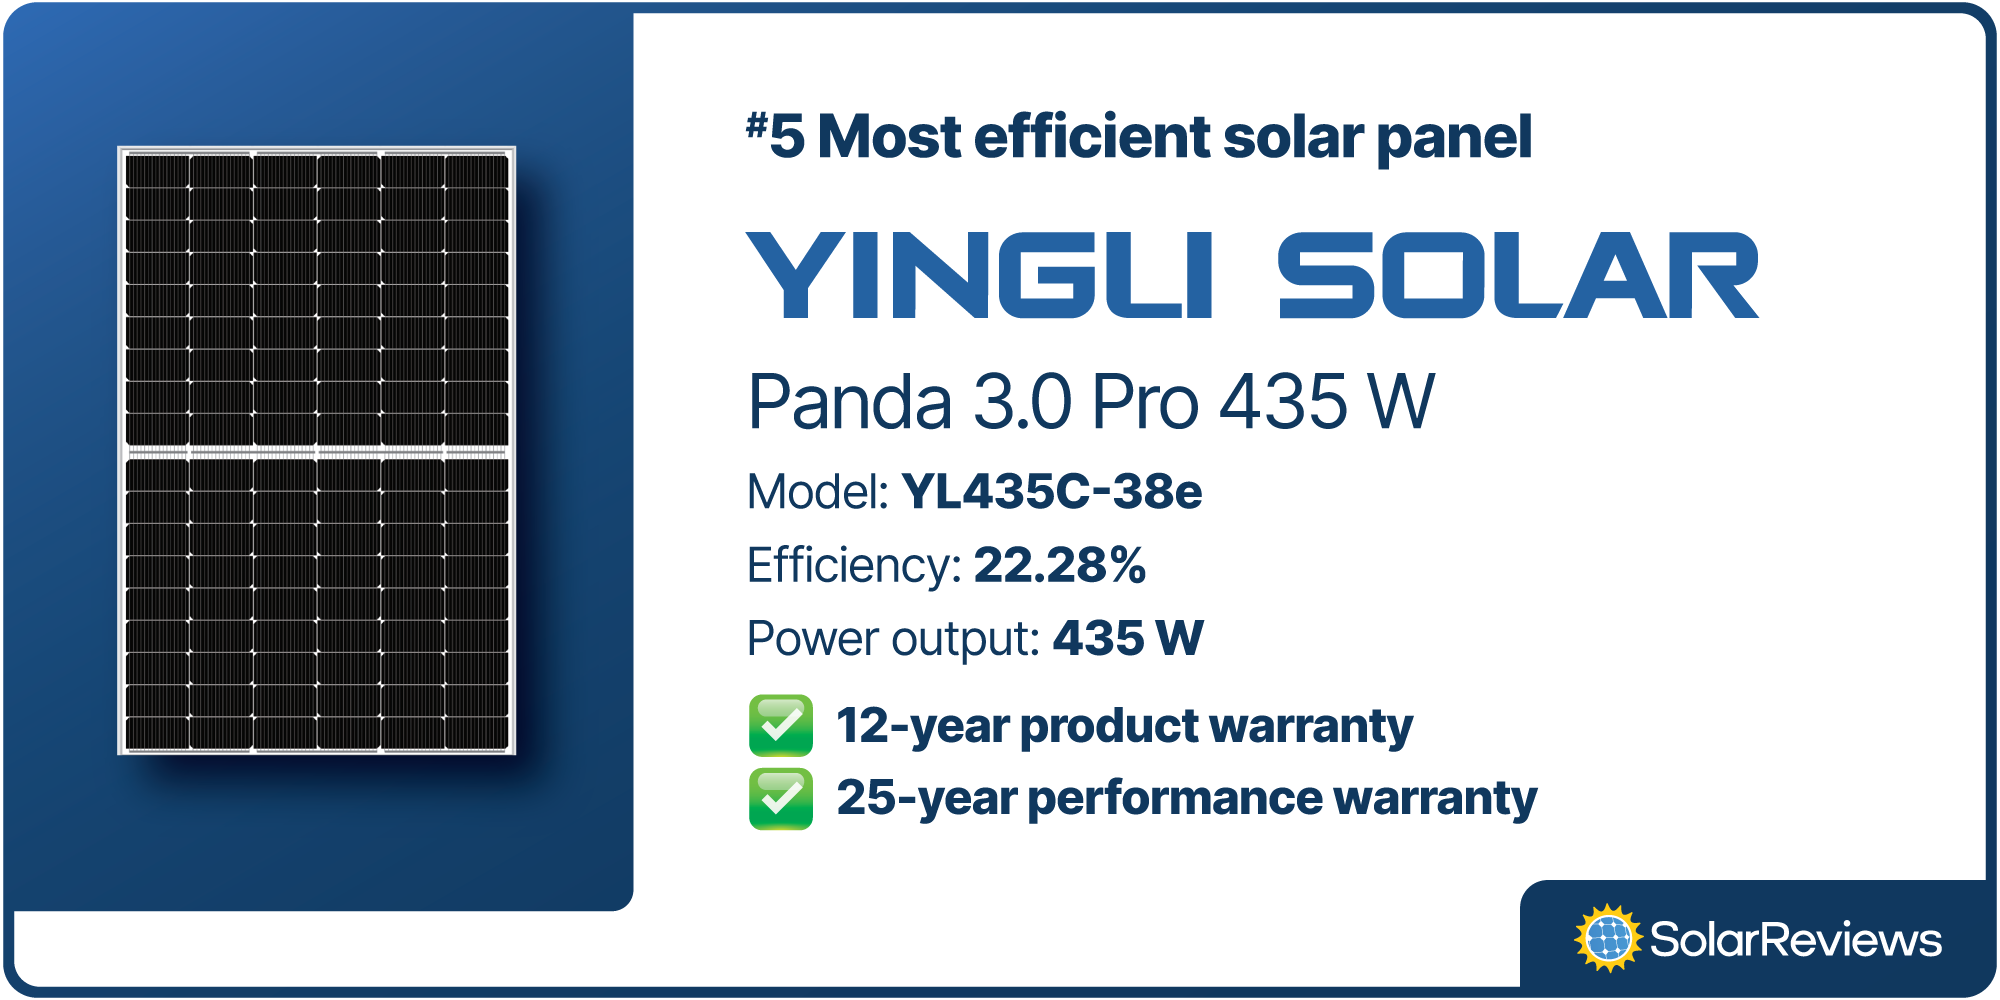 Yingli Solar's Panda 3.0 Pro 435 W solar panel is the fifth most efficient home solar panel at 22.28% efficiency and comes with a 12-year product and 25-year performance warranty.